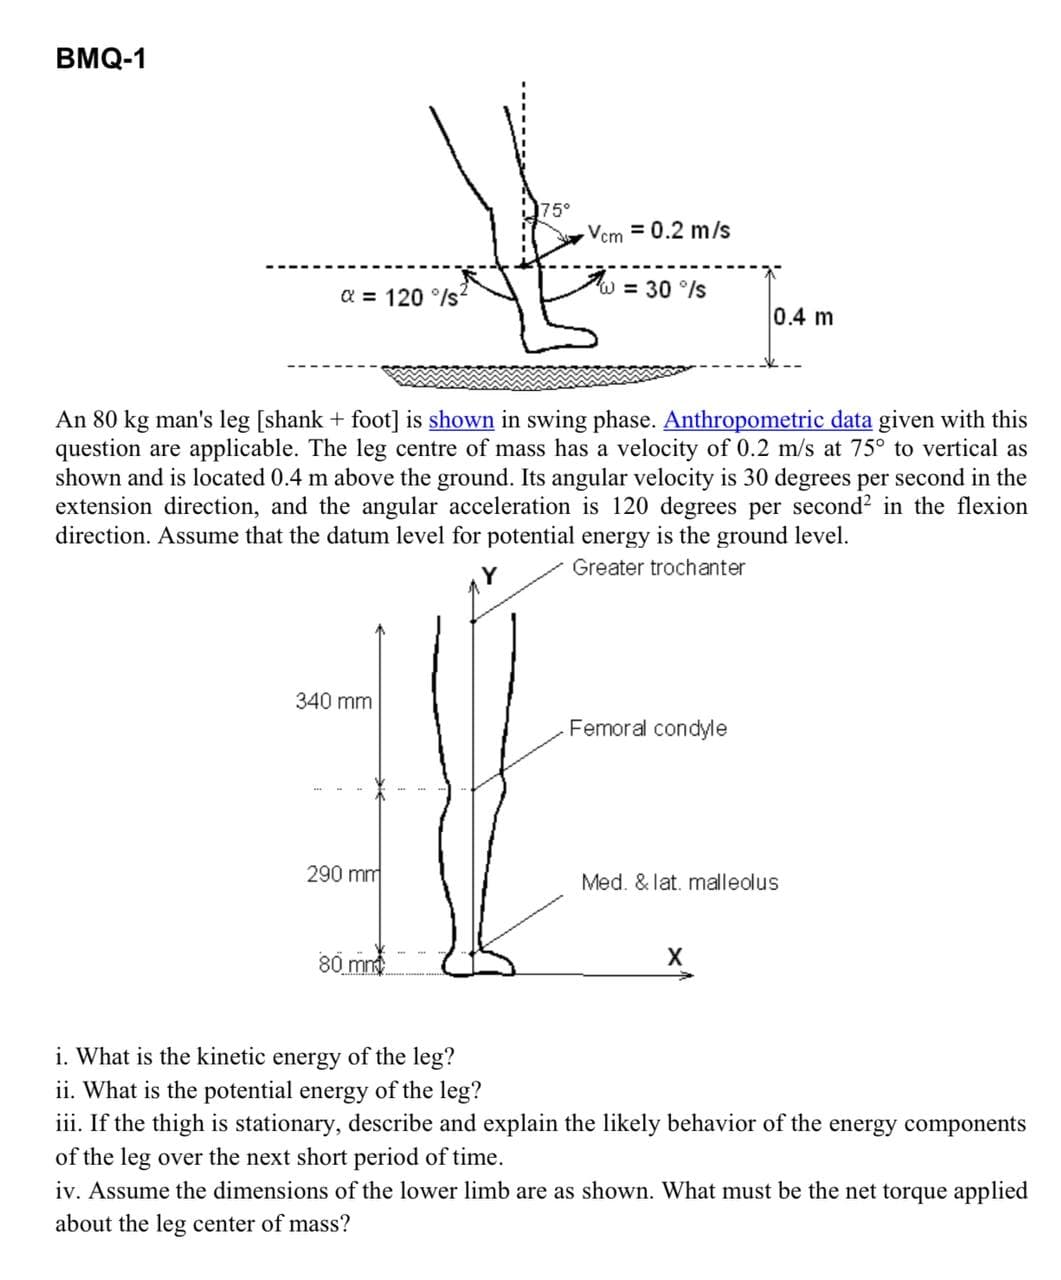 BMQ-1
75°
Vem = 0.2 m/s
W = 30 °/s
a = 120°/s
0.4 m
An 80 kg man's leg [shank + foot] is shown in swing phase. Anthropometric data given with this
question are applicable. The leg centre of mass has a velocity of 0.2 m/s at 75° to vertical as
shown and is located 0.4 m above the ground. Its angular velocity is 30 degrees per second in the
extension direction, and the angular acceleration is 120 degrees per second² in the flexion
direction. Assume that the datum level for potential energy is the ground level.
Greater trochanter
340 mm
Femoral condyle
290 mm
Med. & lat. malleolus
80 mm
X
i. What is the kinetic energy of the leg?
ii. What is the potential energy of the leg?
iii. If the thigh is stationary, describe and explain the likely behavior of the energy components
of the leg over the next short period of time.
iv. Assume the dimensions of the lower limb are as shown. What must be the net torque applied
about the leg center of mass?